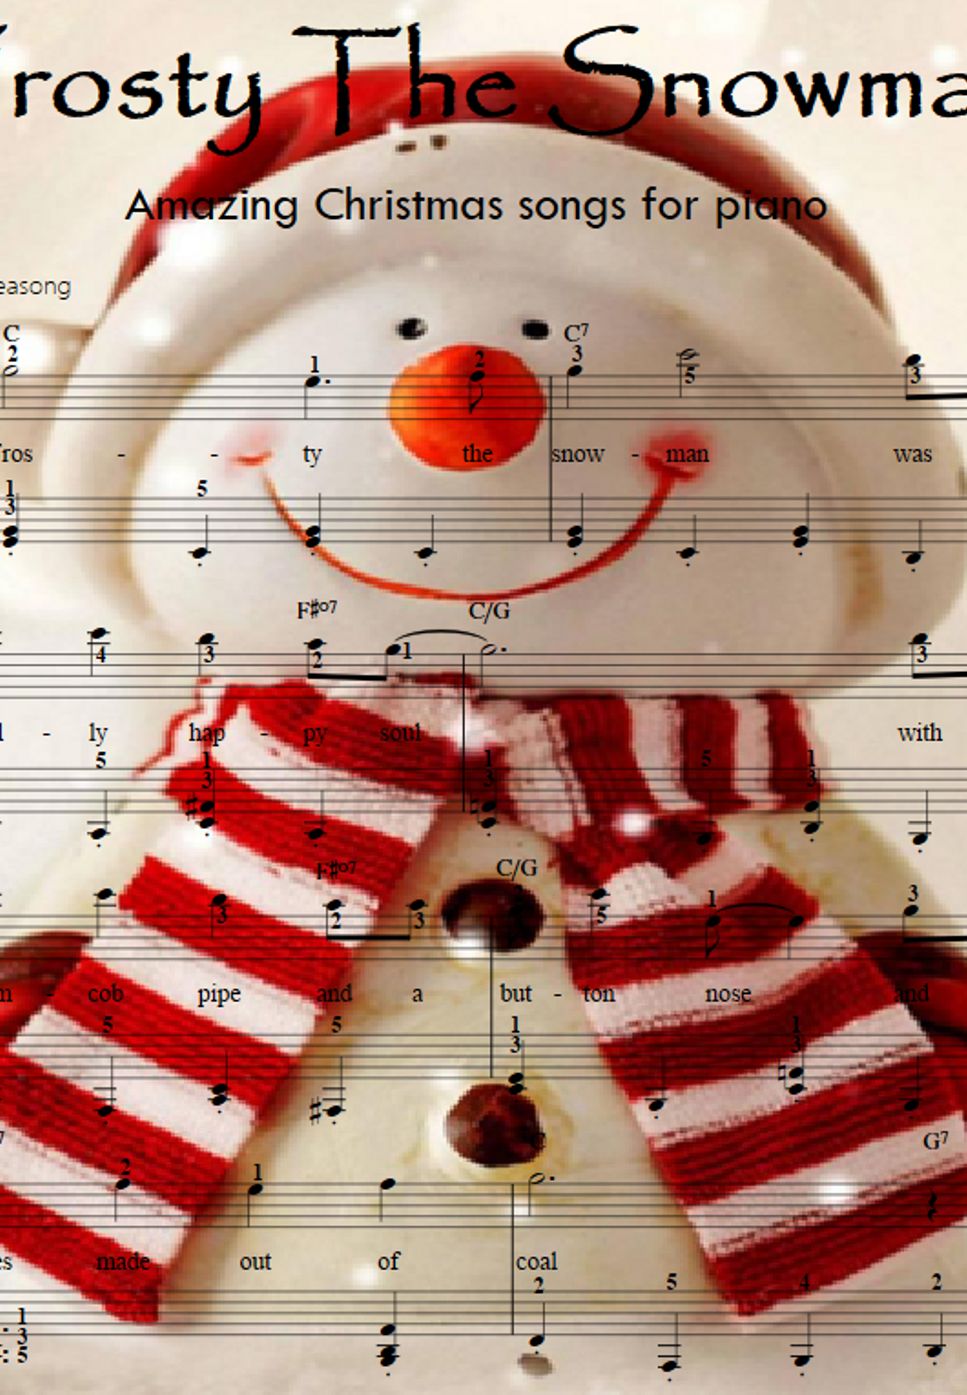 Frosty The Snowman（easy piano solo)Christmas songs by likeasong